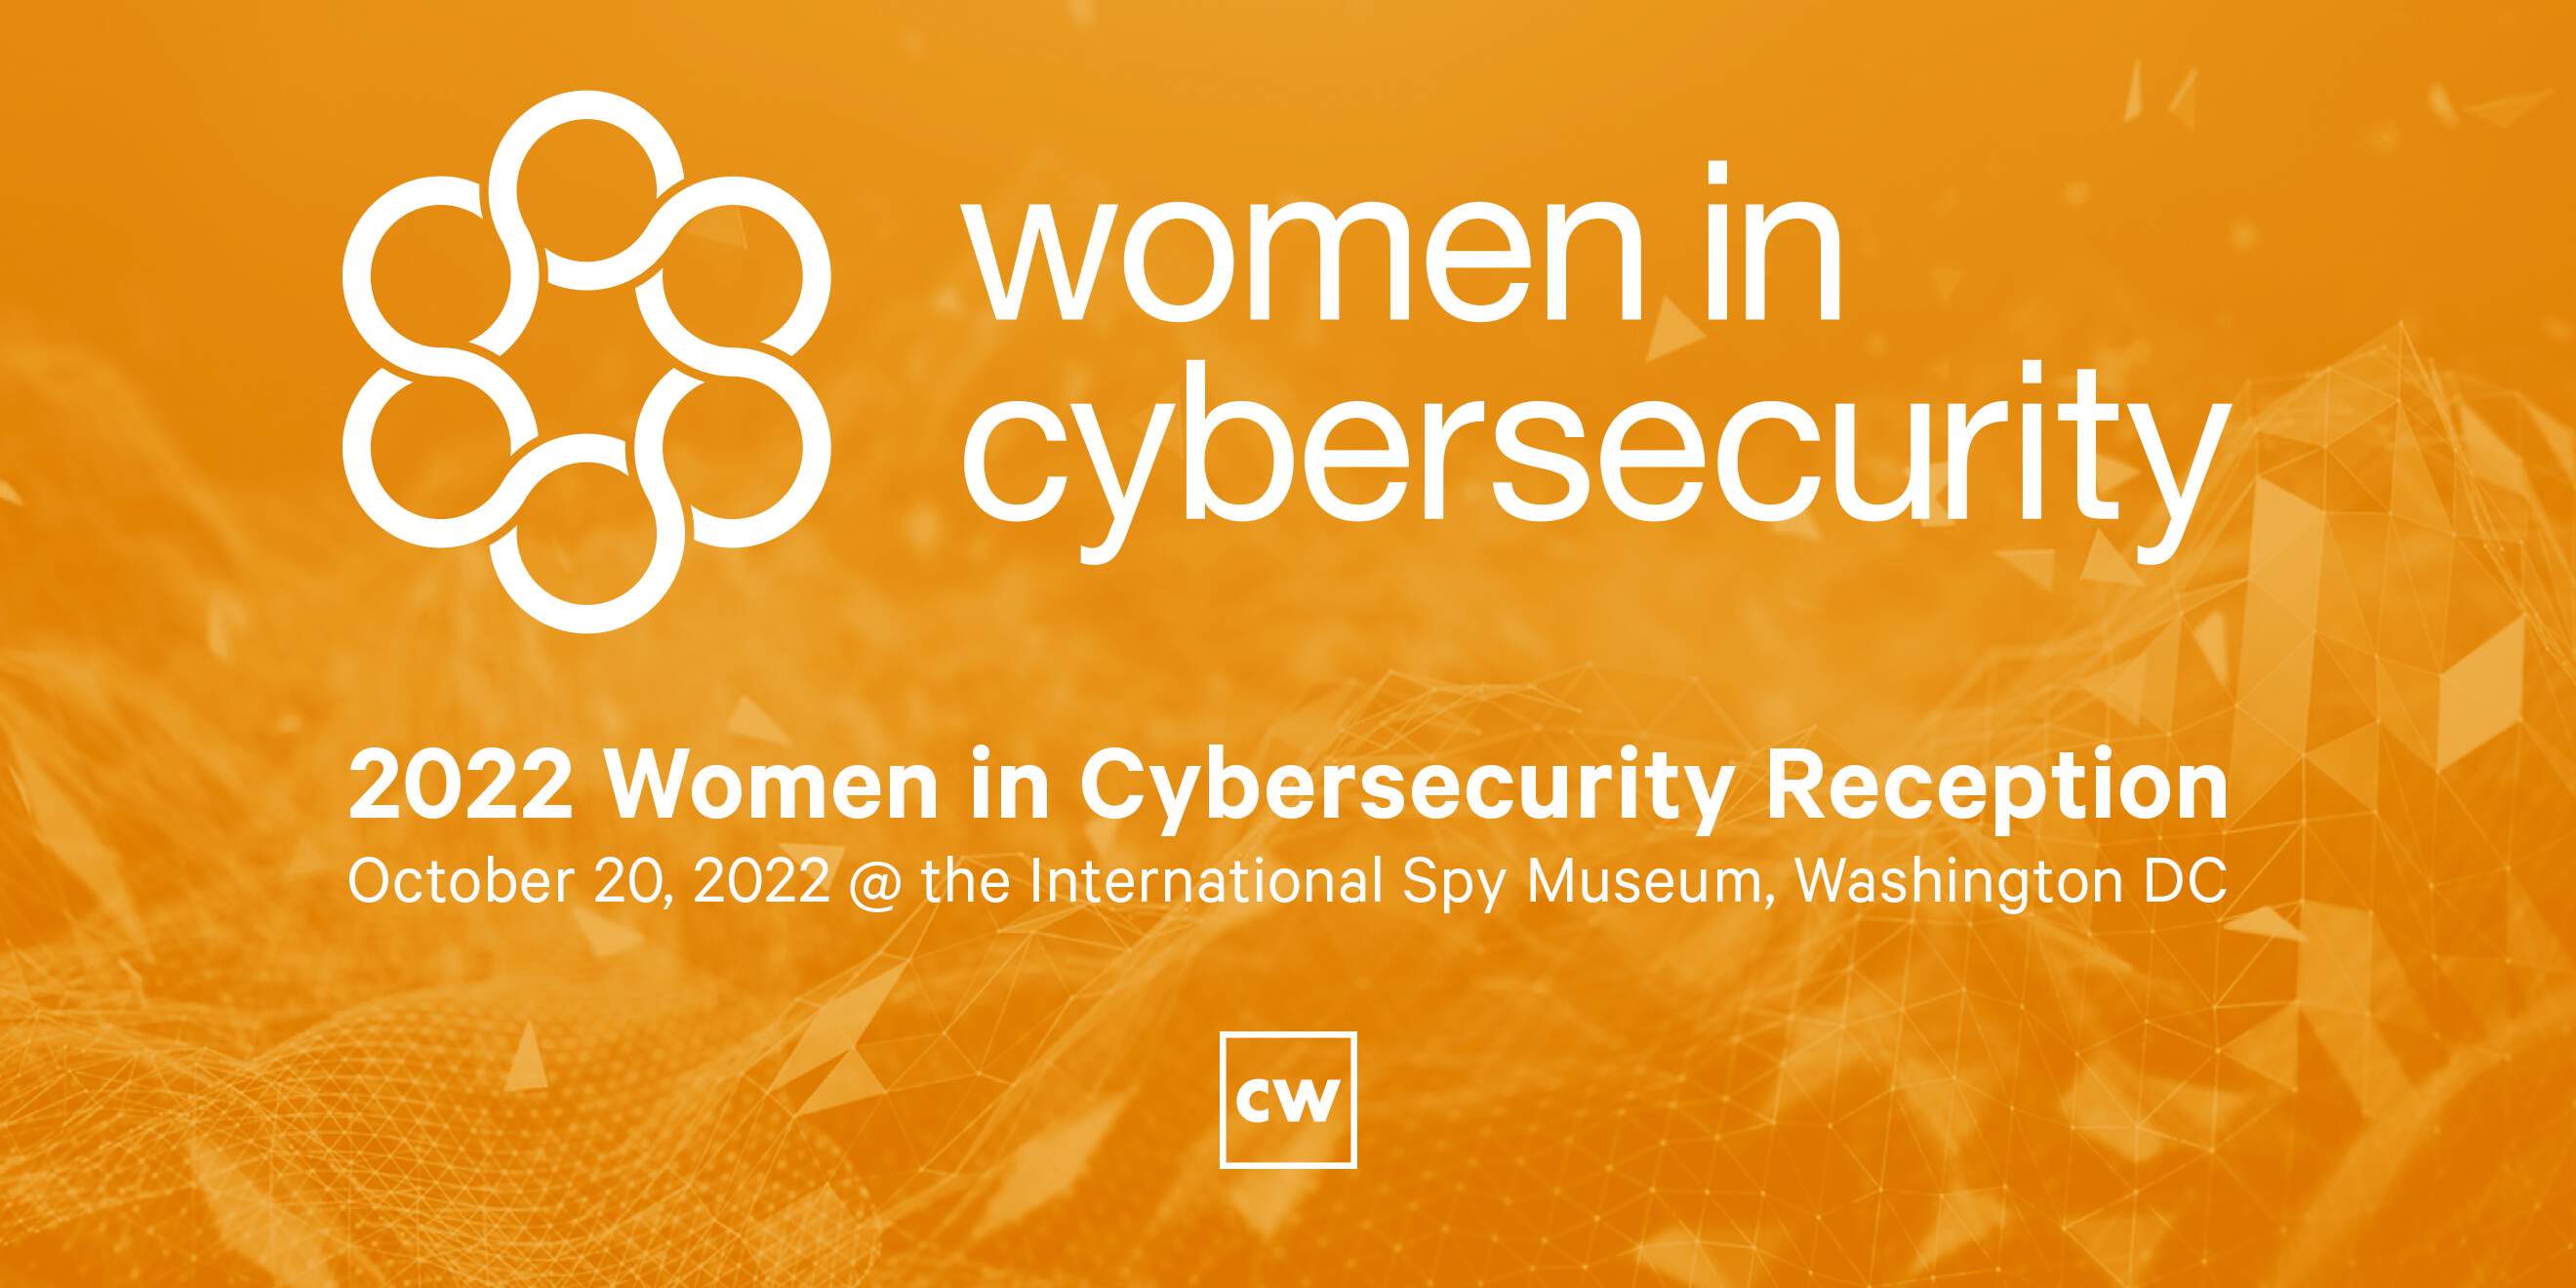 Panel on hidden figures of cyber skills gap added to CyberWire’s Annual Women in Cybersecurity Reception.